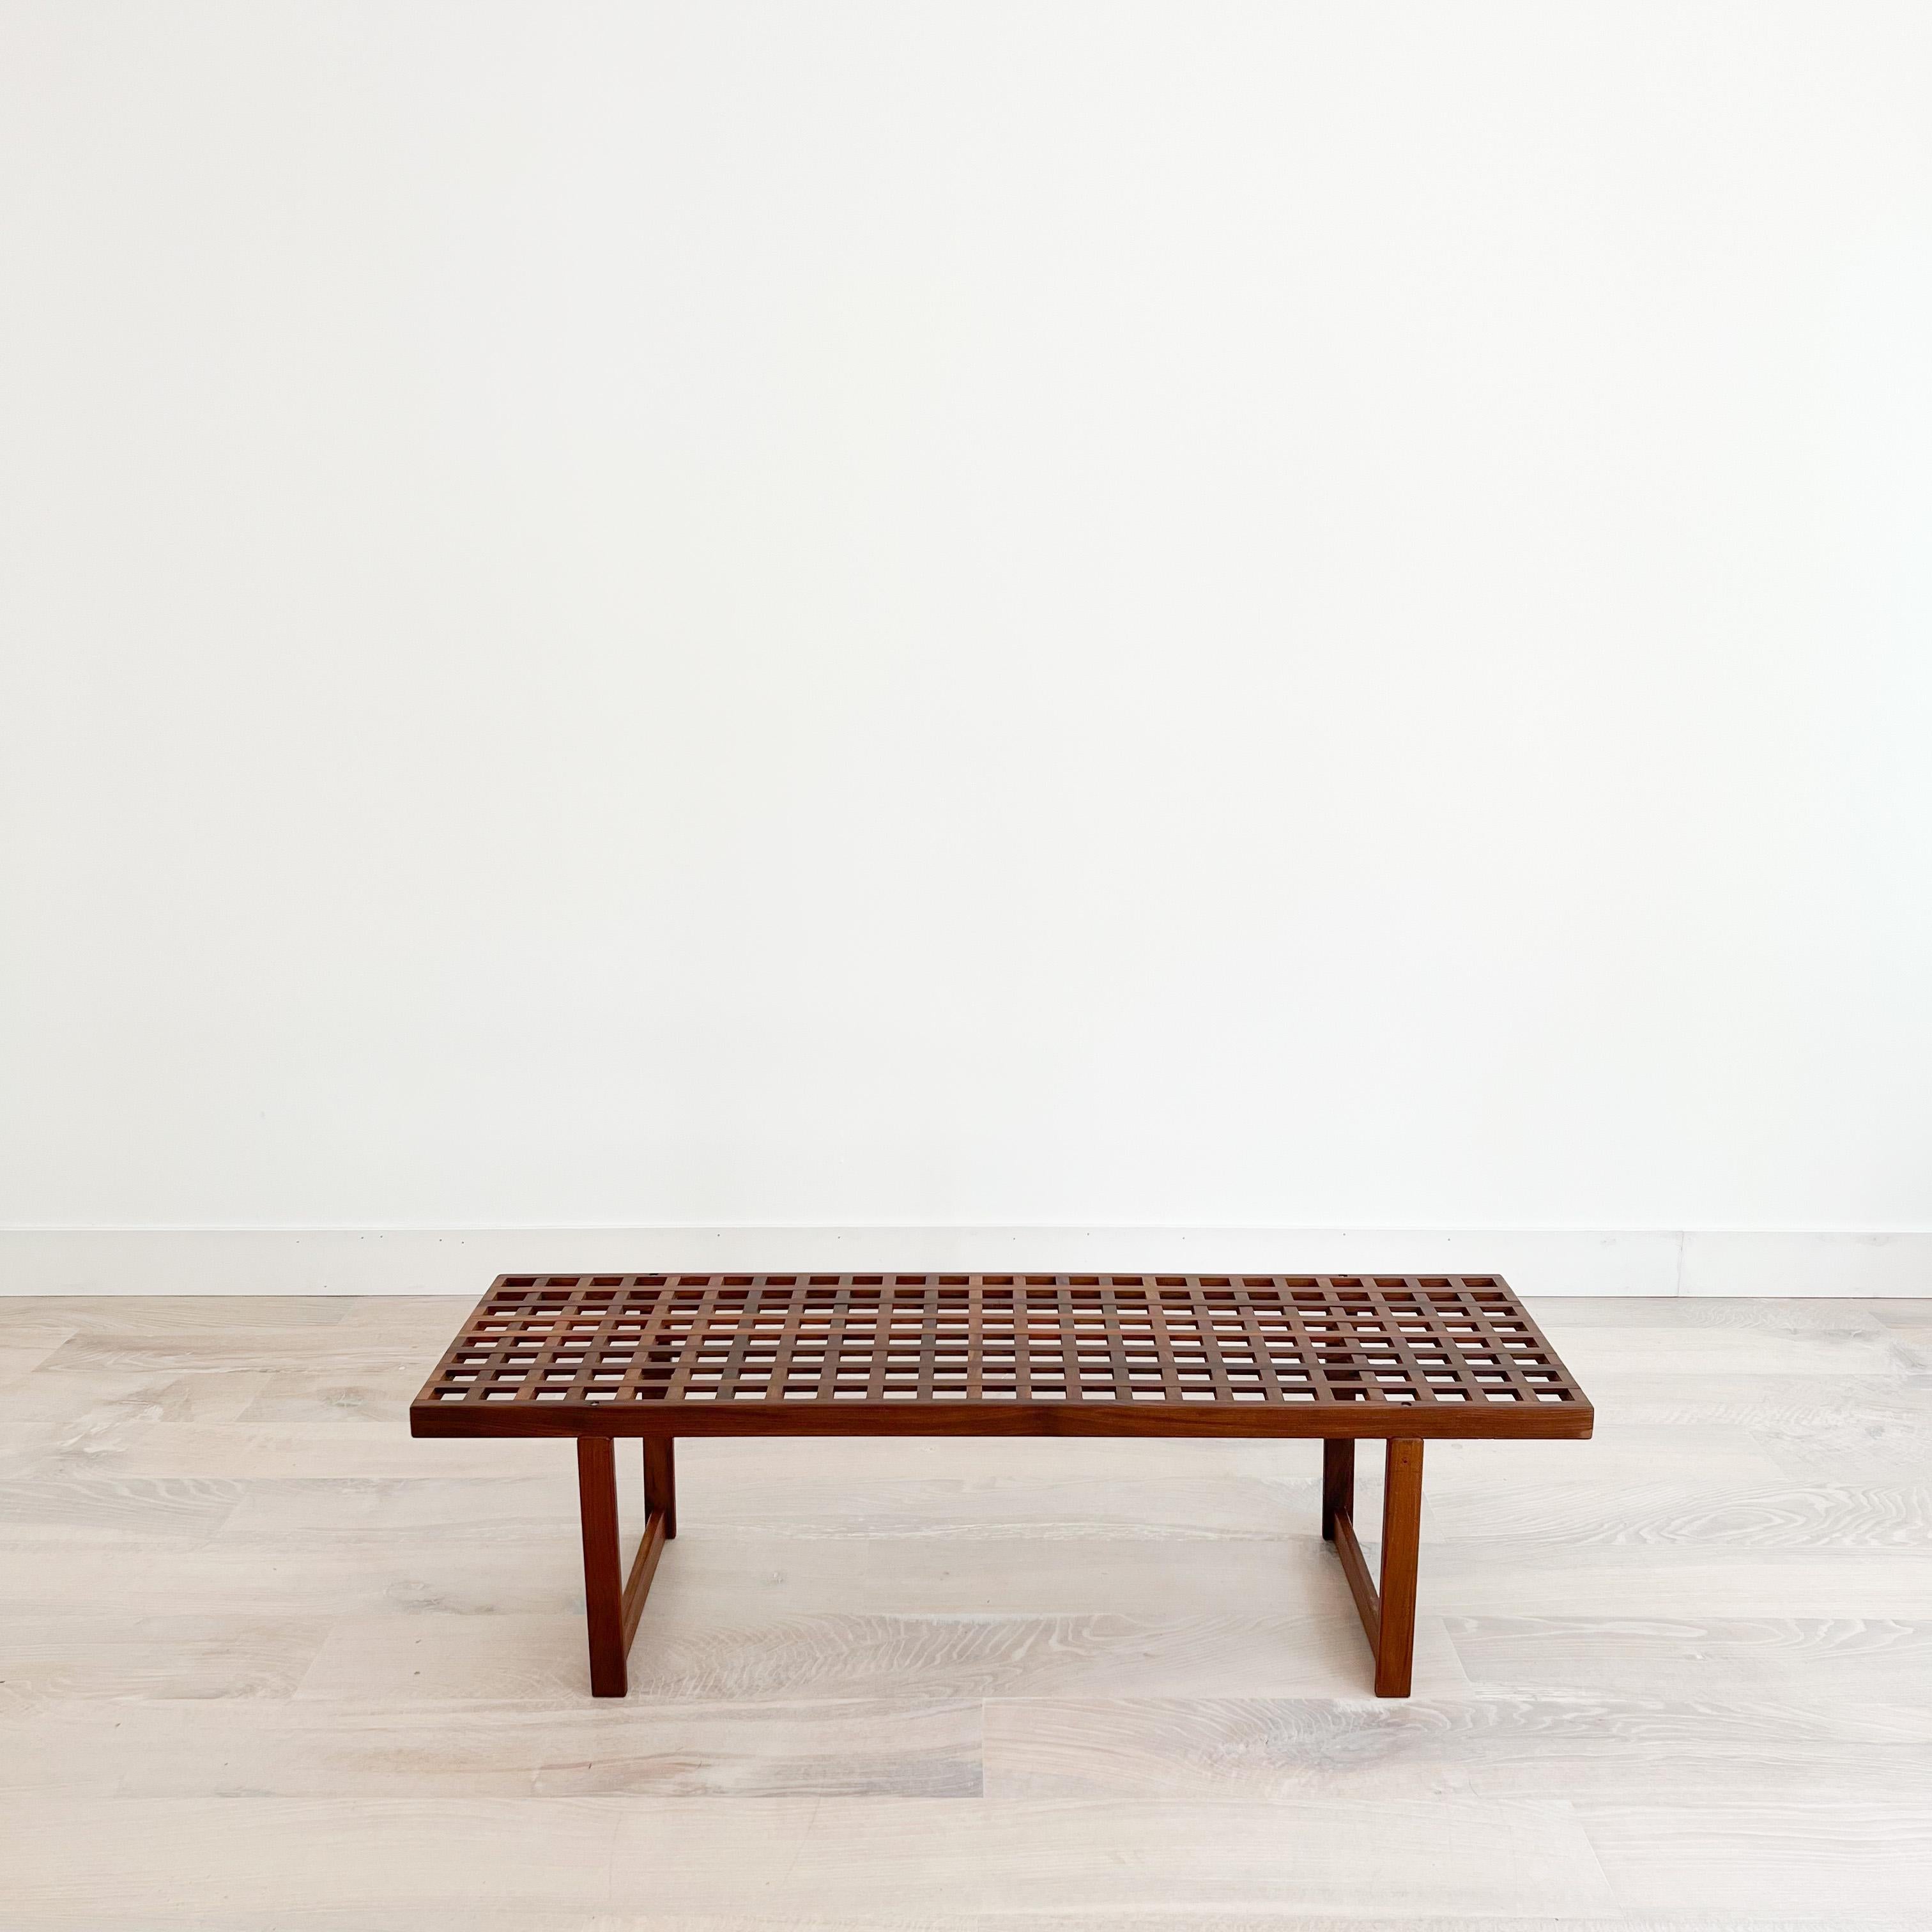 Hard to find Mid-Century Modern Peter Løvig Nielsen lattice coffee table/bench. The teak wood is in great condition overall. Some light scuffing/scratching from age appropriate wear.